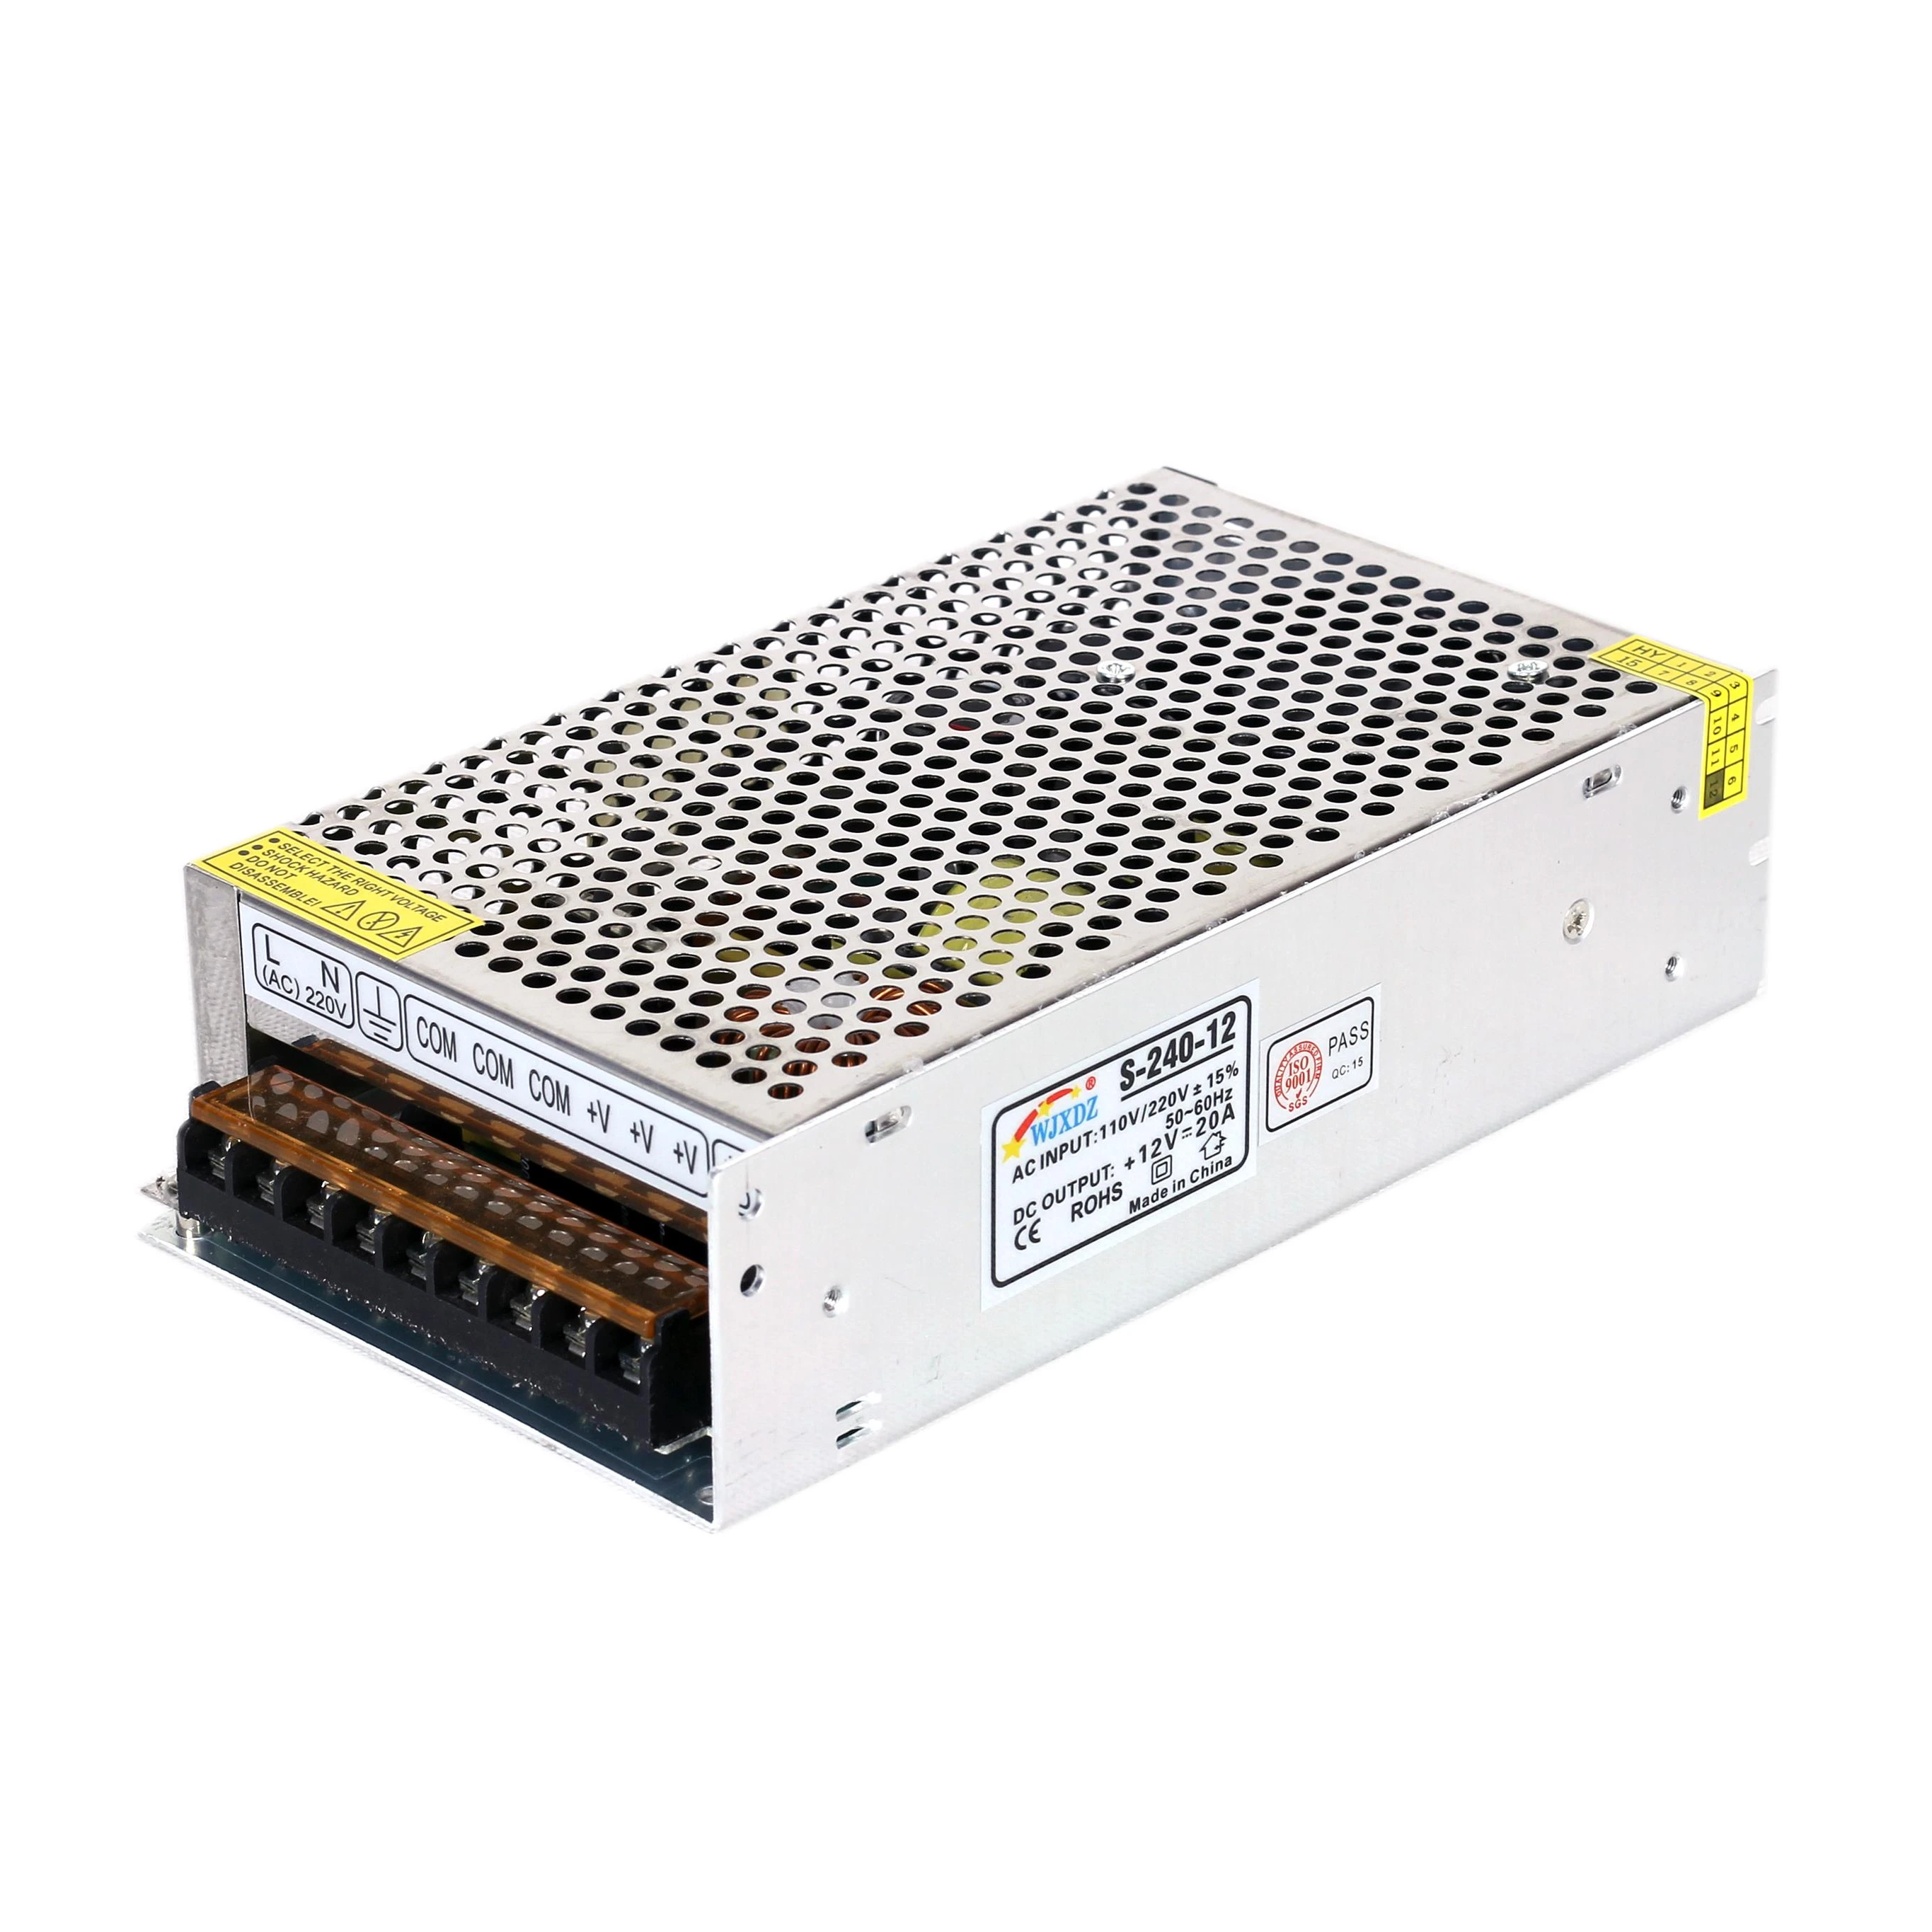 Professional manufacture Led driver Constant Voltage 12V 20A 240W 250W switching power supply for LED STRIP